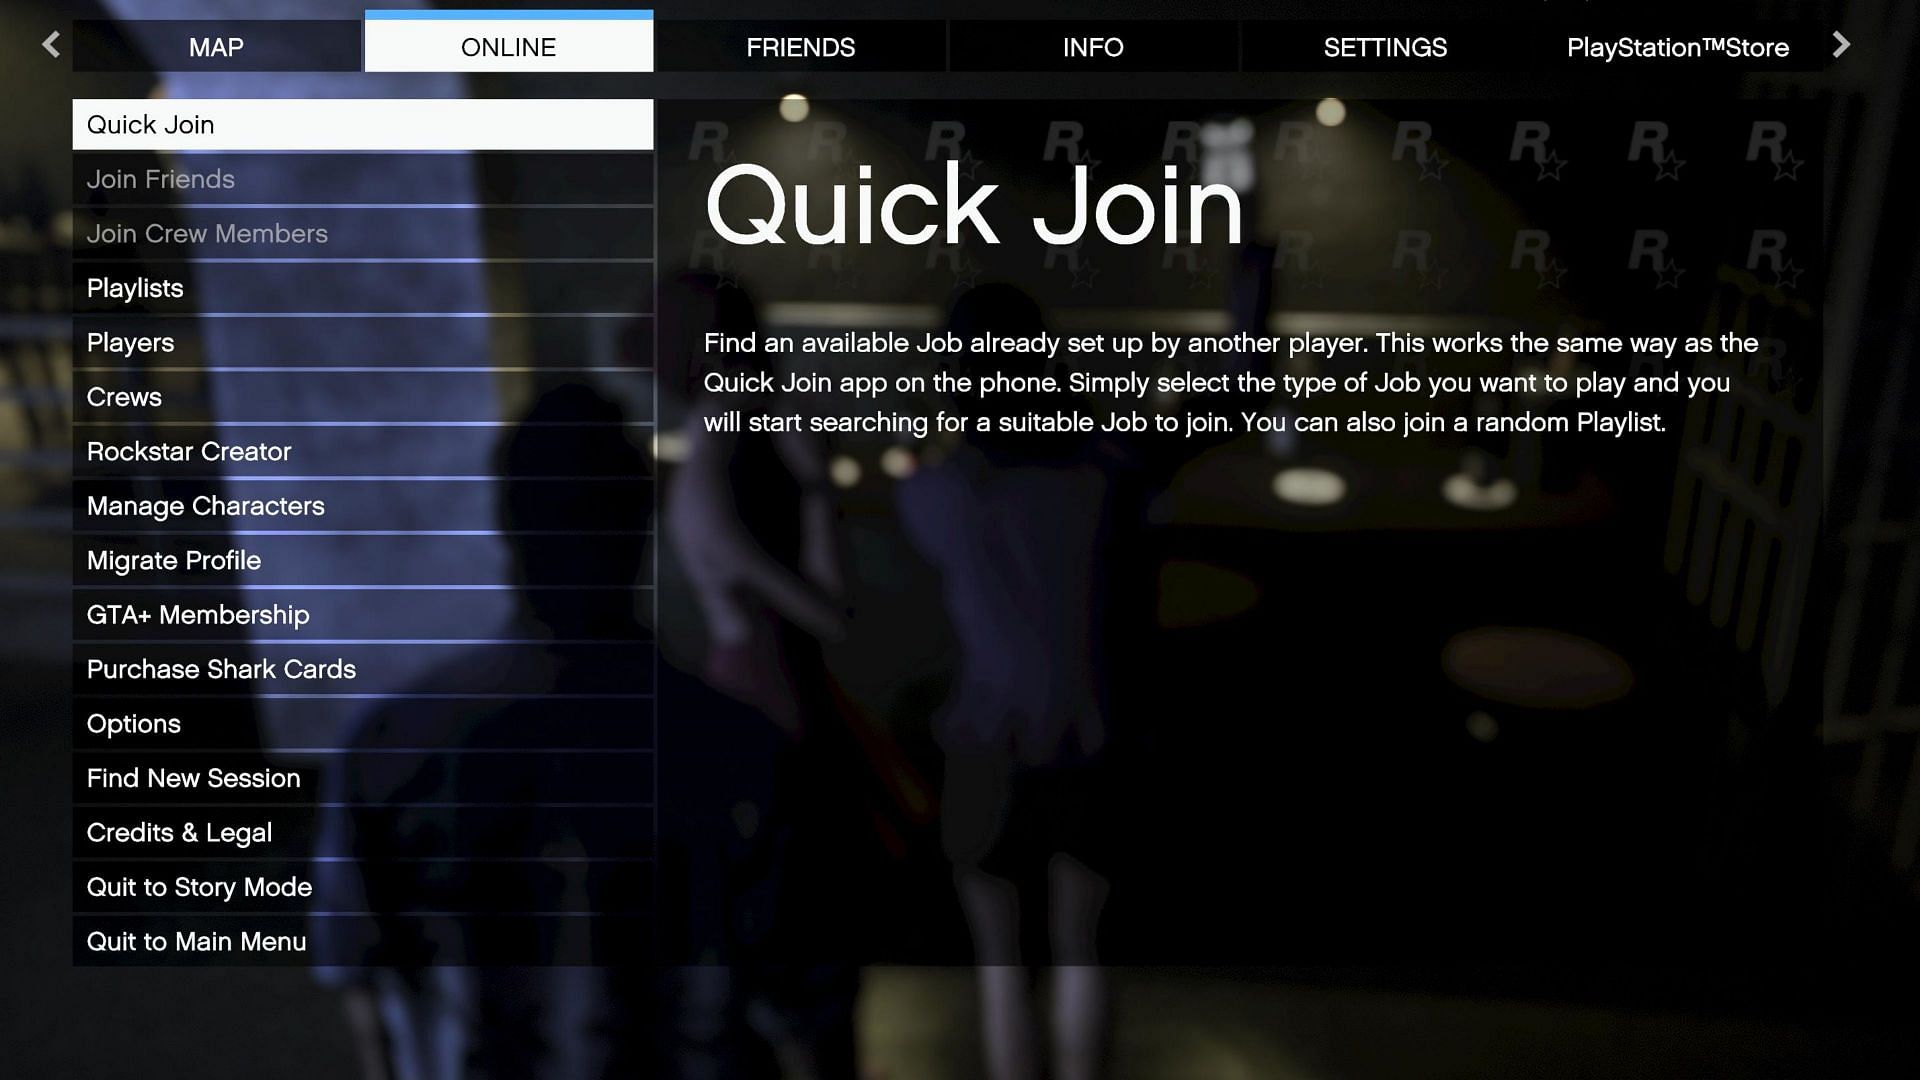 How the Quick Join option looks like in the pause menu (Image via Rockstar Games)